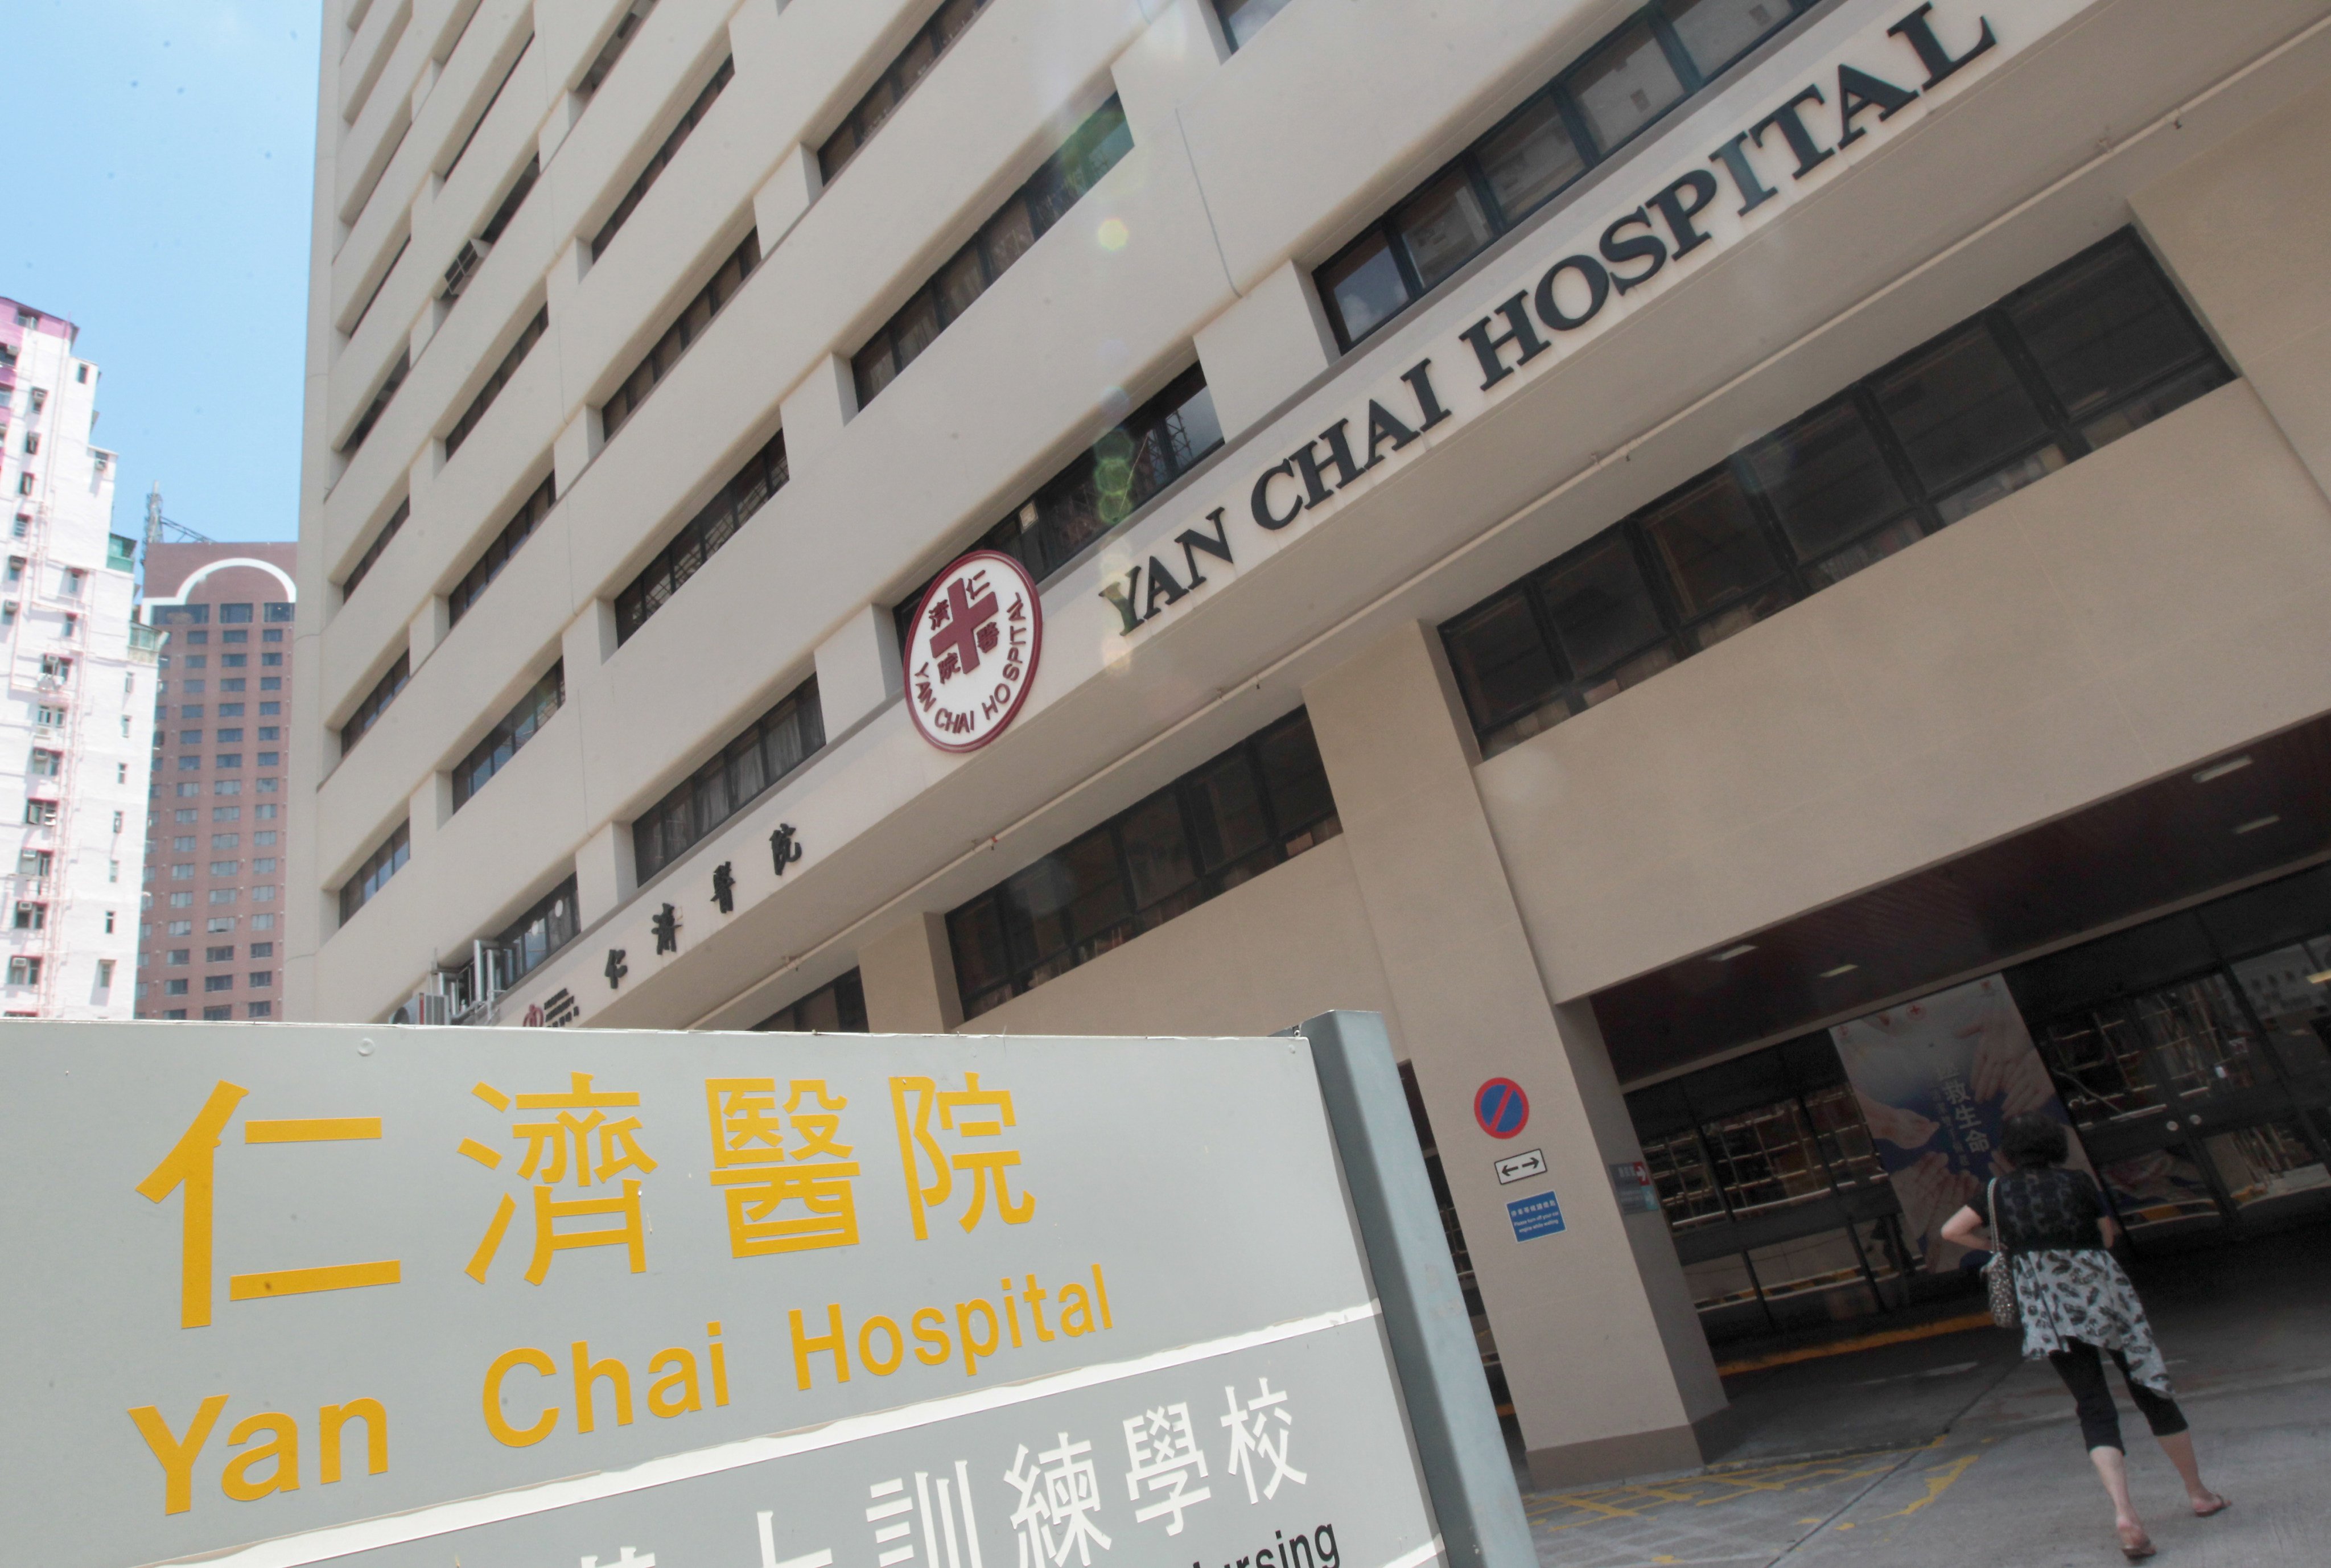 The girl was being treated at Yan Chai hospital when she suffered a cardiac arrest. Photo: K. Y. Cheng